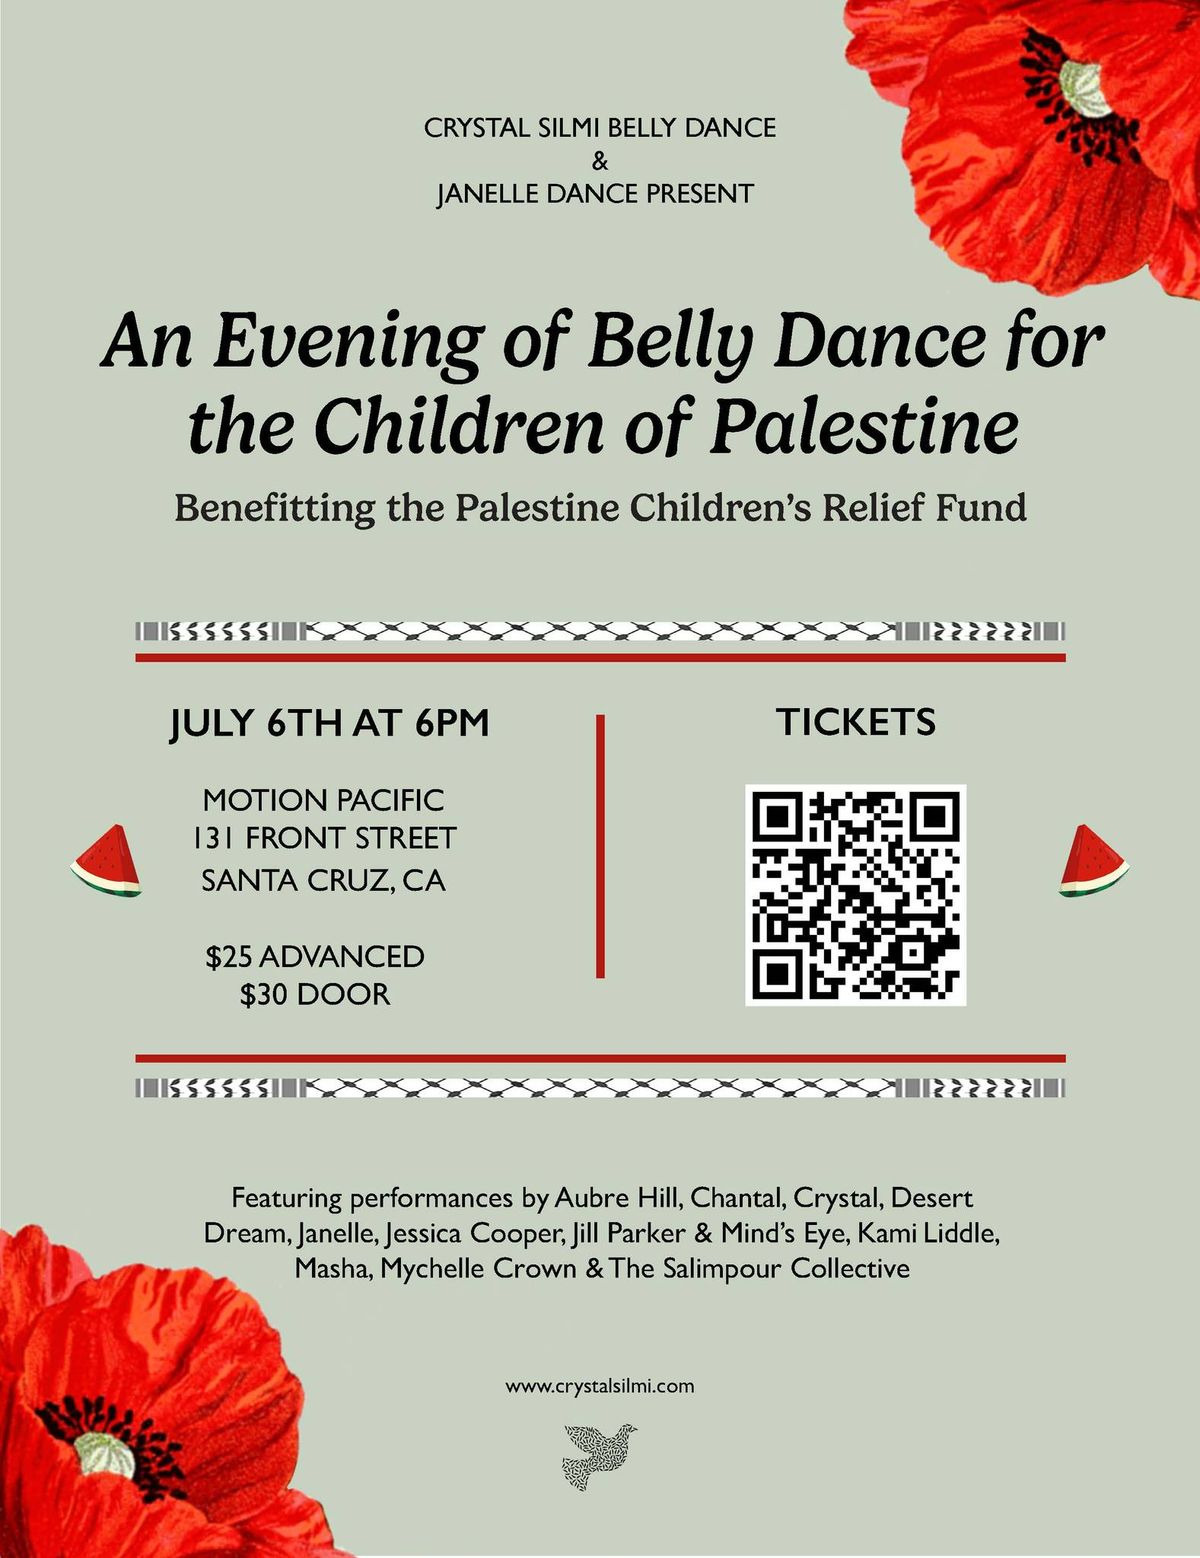 An Evening of Belly Dance for the Children of Palestine